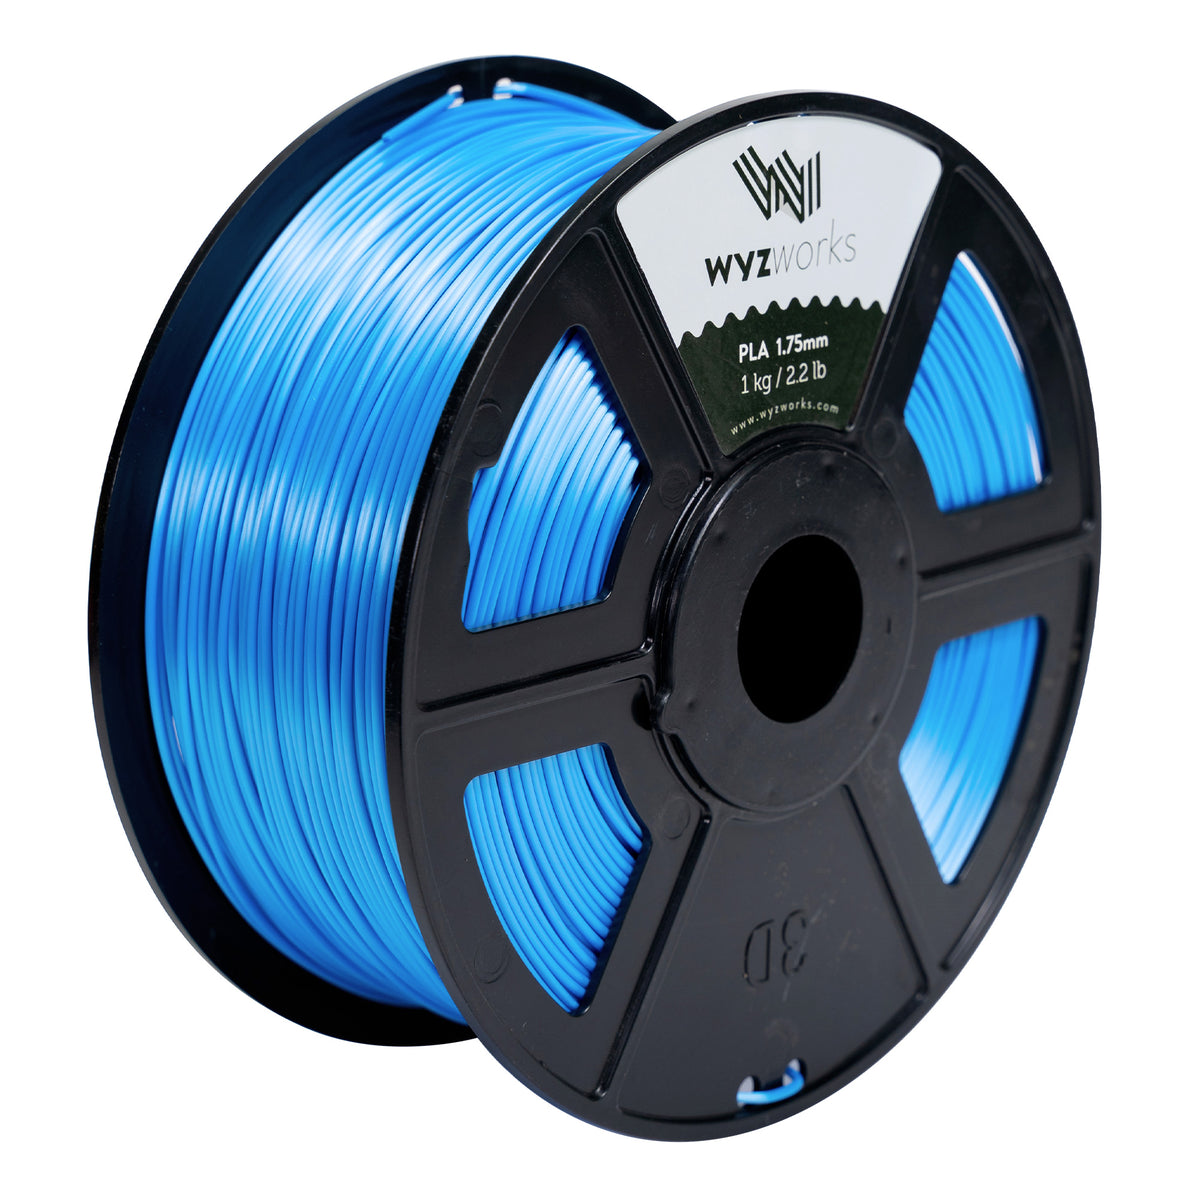 WYZworks PLA 1.75mm [ SILK BLUE ] Premium Thermoplastic Polylactic Acid 3D Printer Filament - Dimensional Accuracy +/- 0.05mm 1kg / 2.2lb + [ Multiple Color Options Available ]